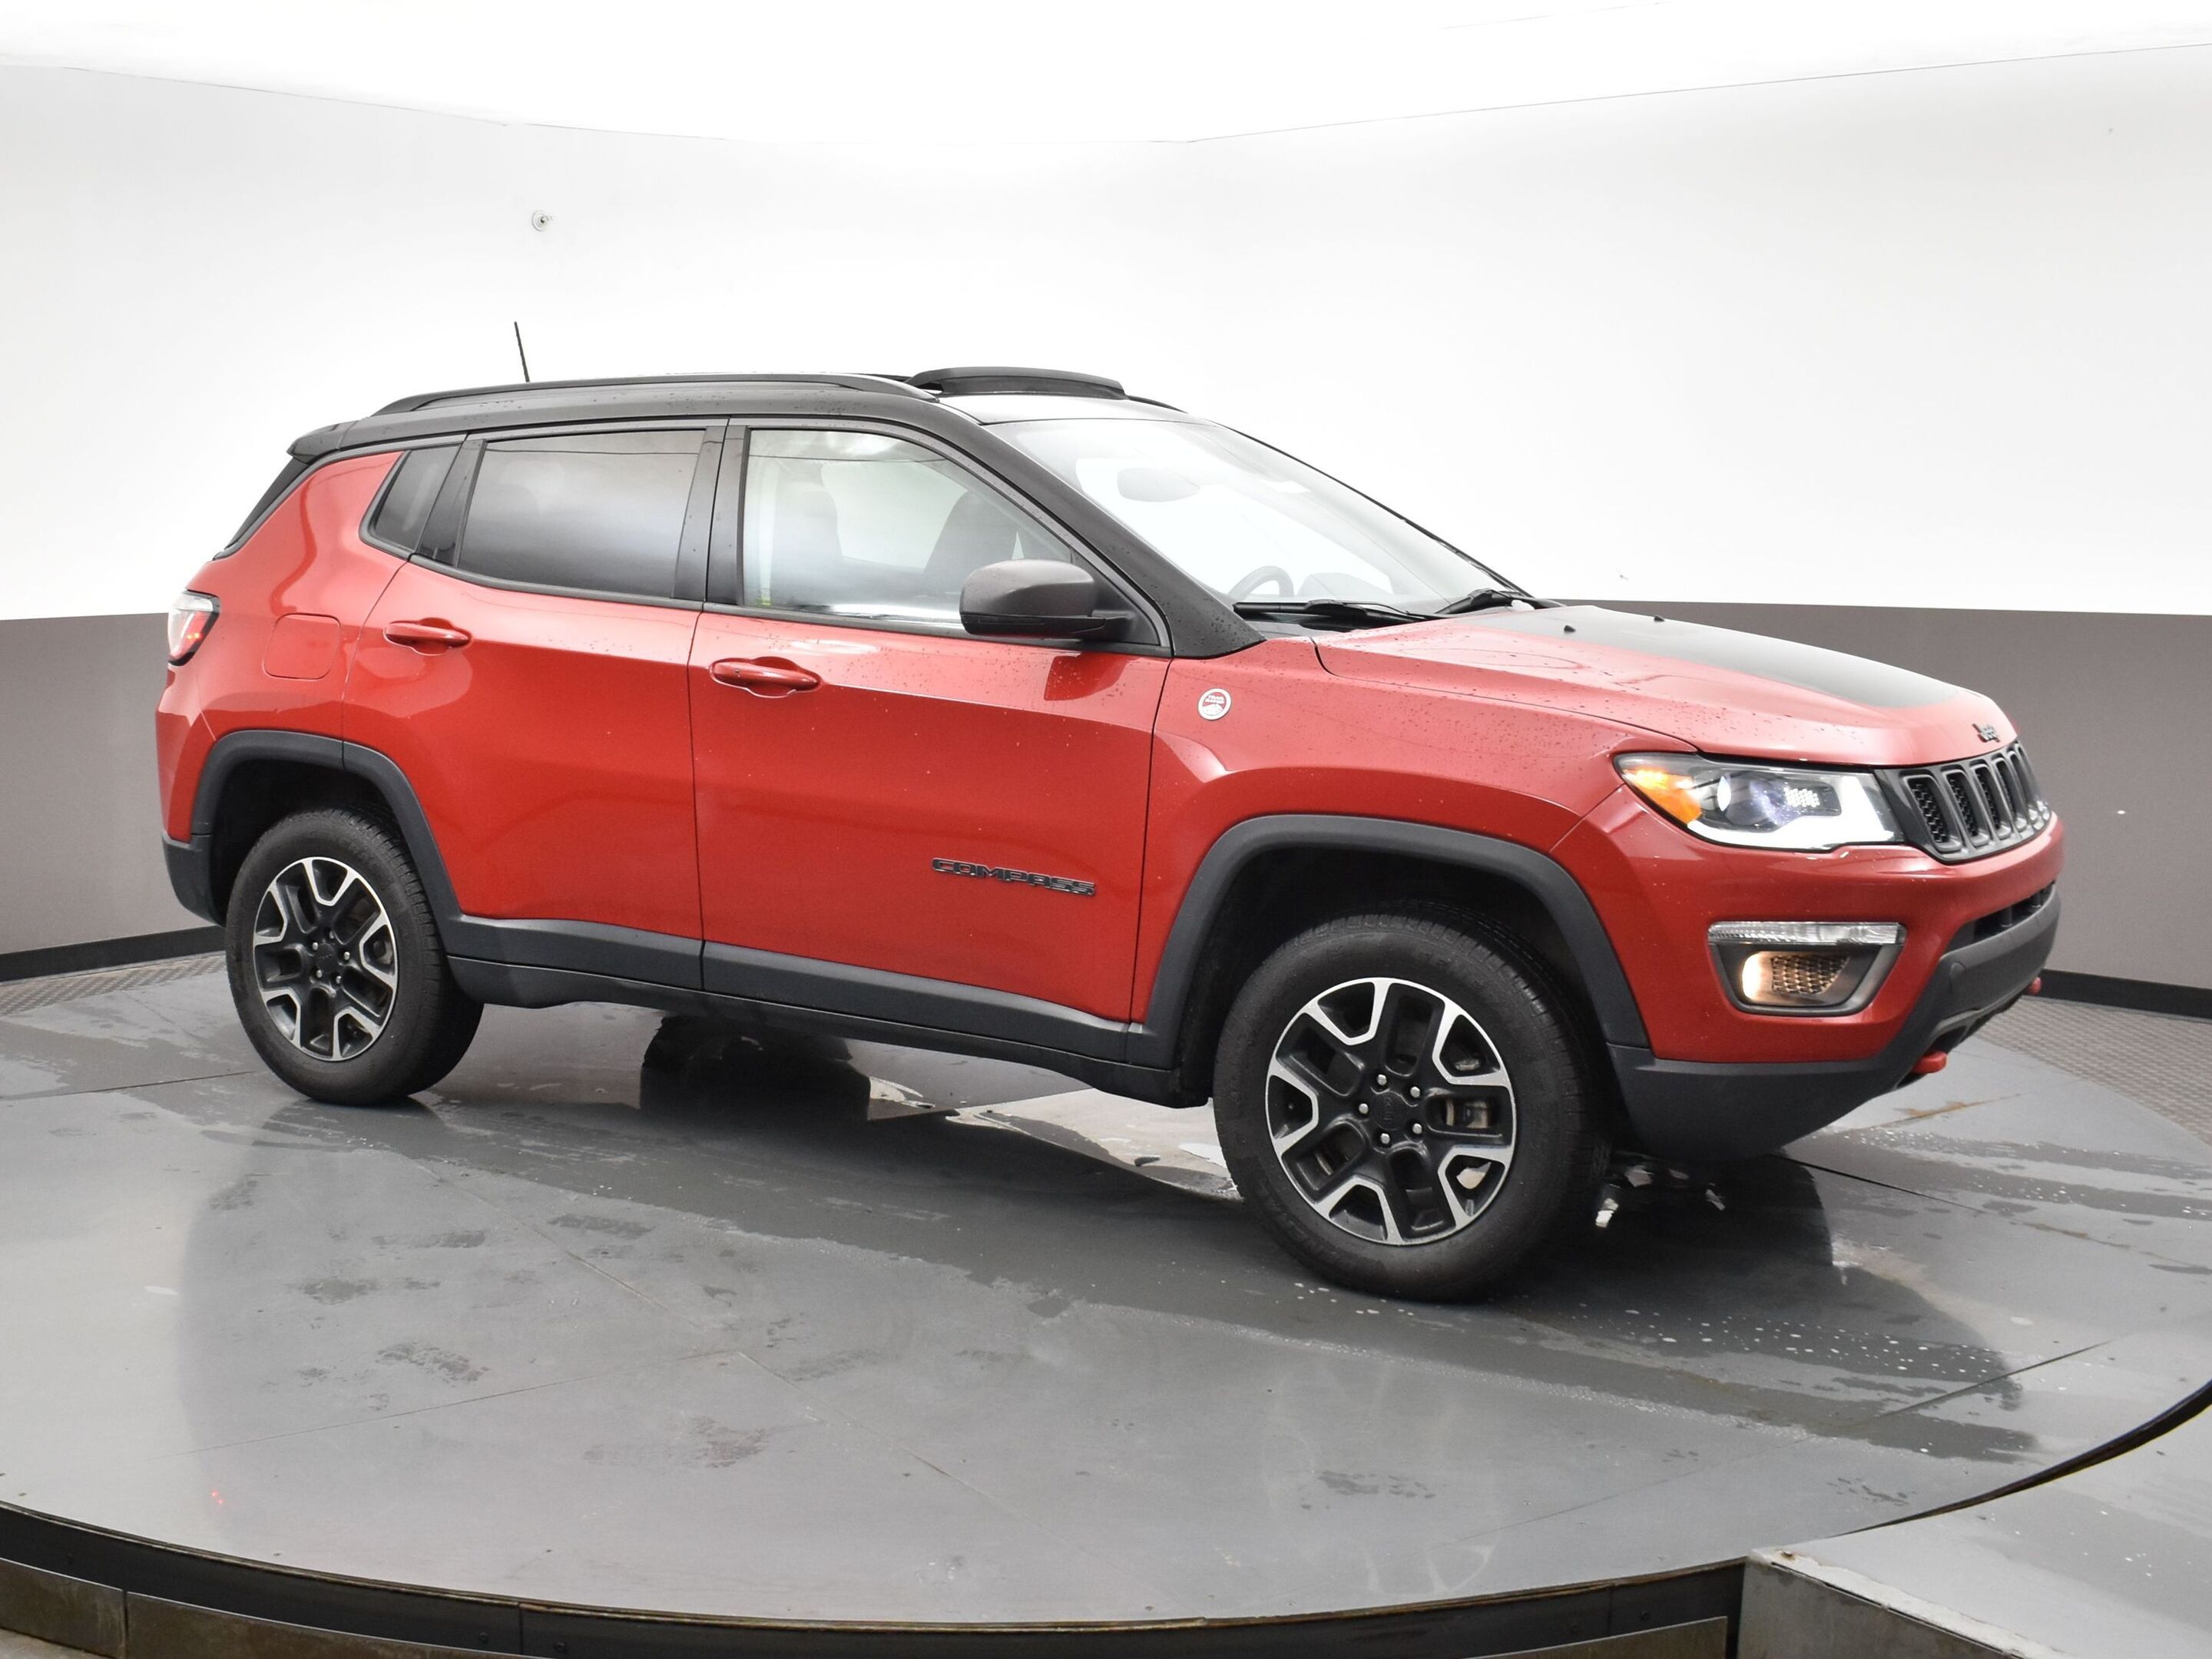 2021 Jeep Compass TRAIL HAWK 4x4 with DUAL CLIMATE CONTROL, SUNROOF,